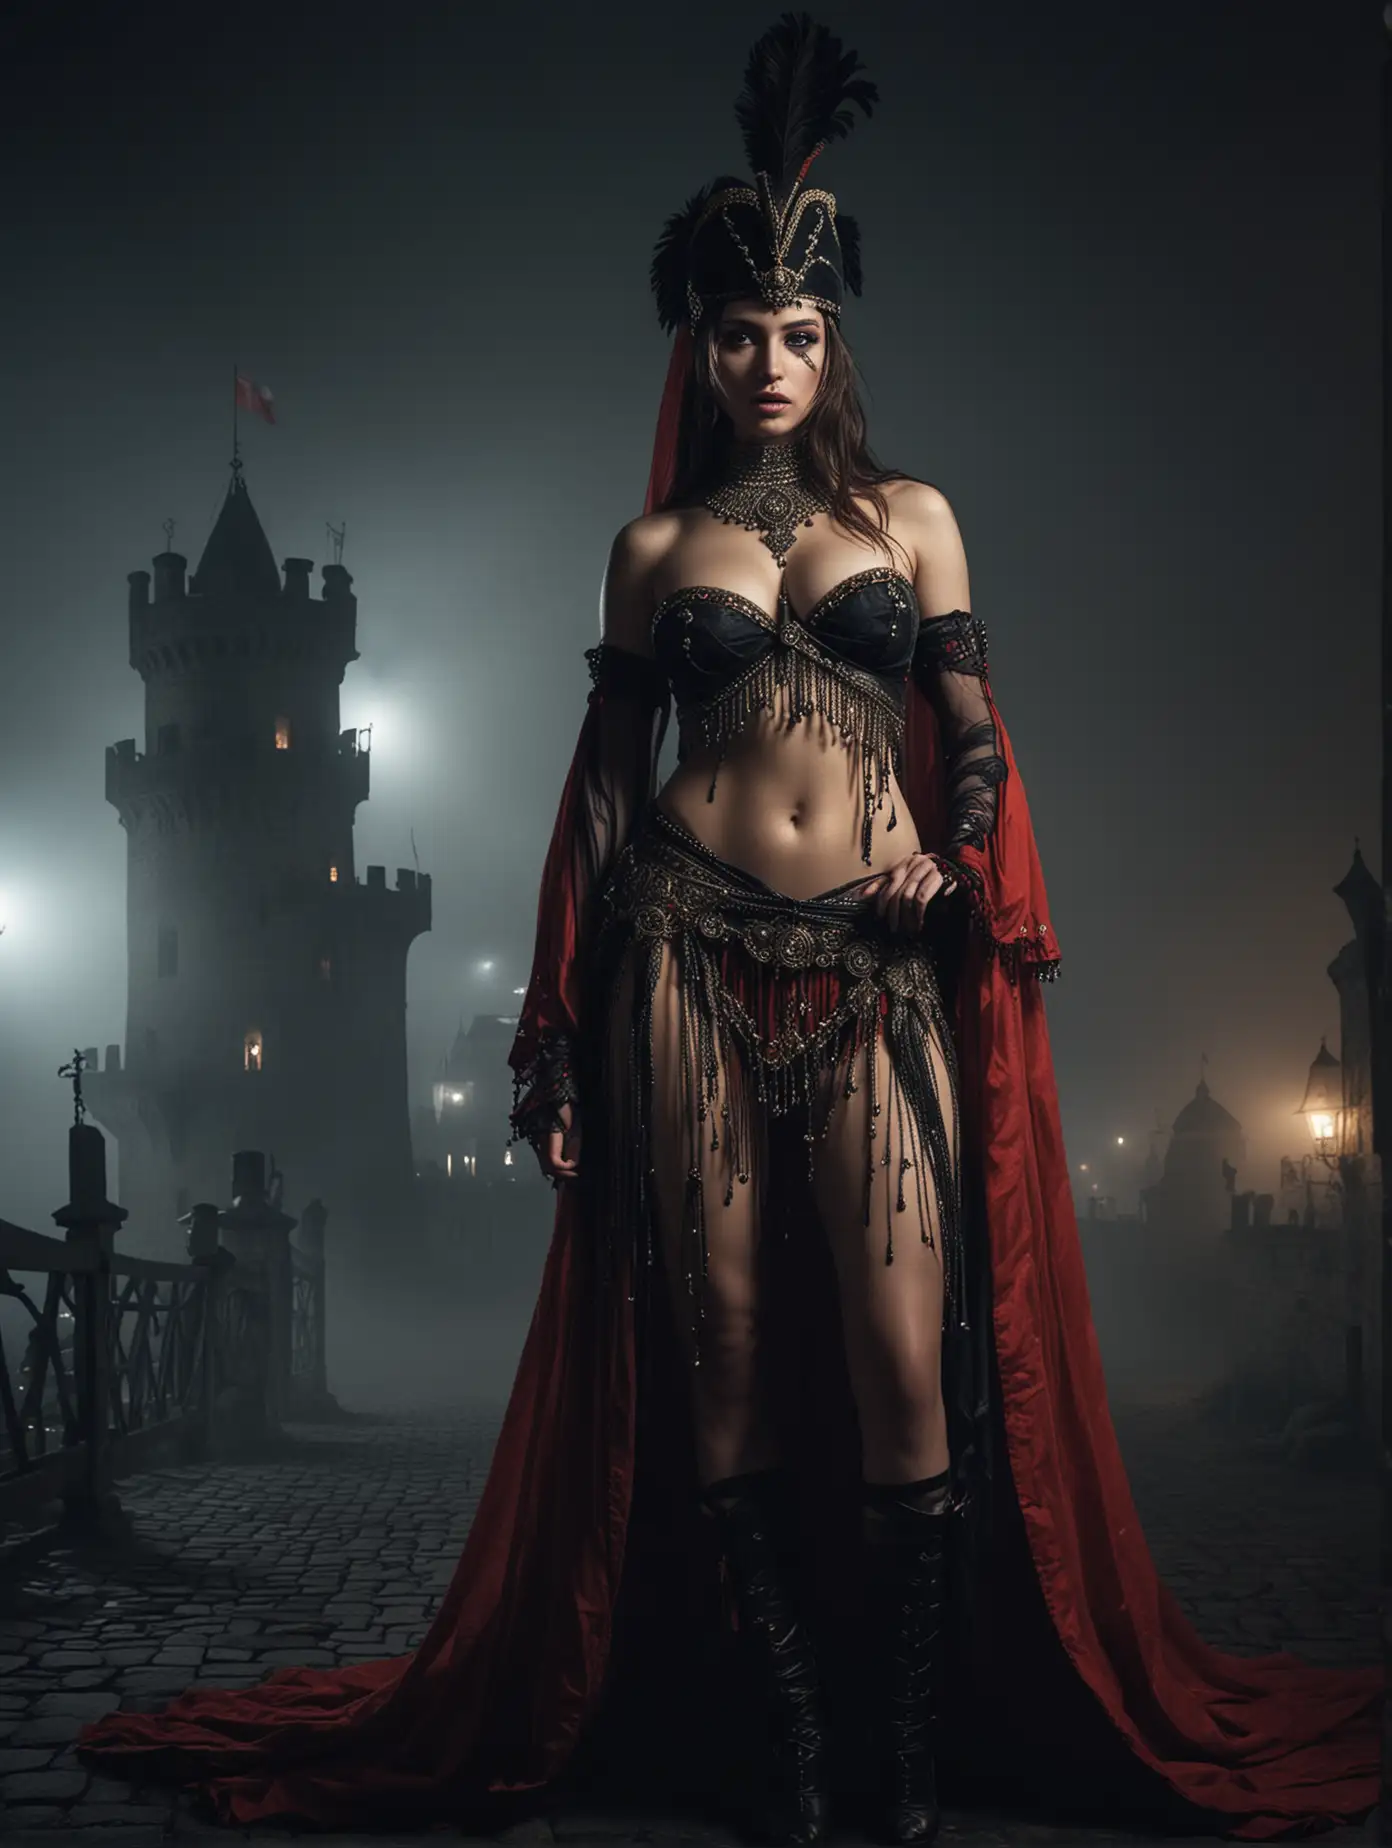 Polish-Hussar-Entranced-by-Veiled-Belly-Dancer-in-Ghostly-Fortress-Setting